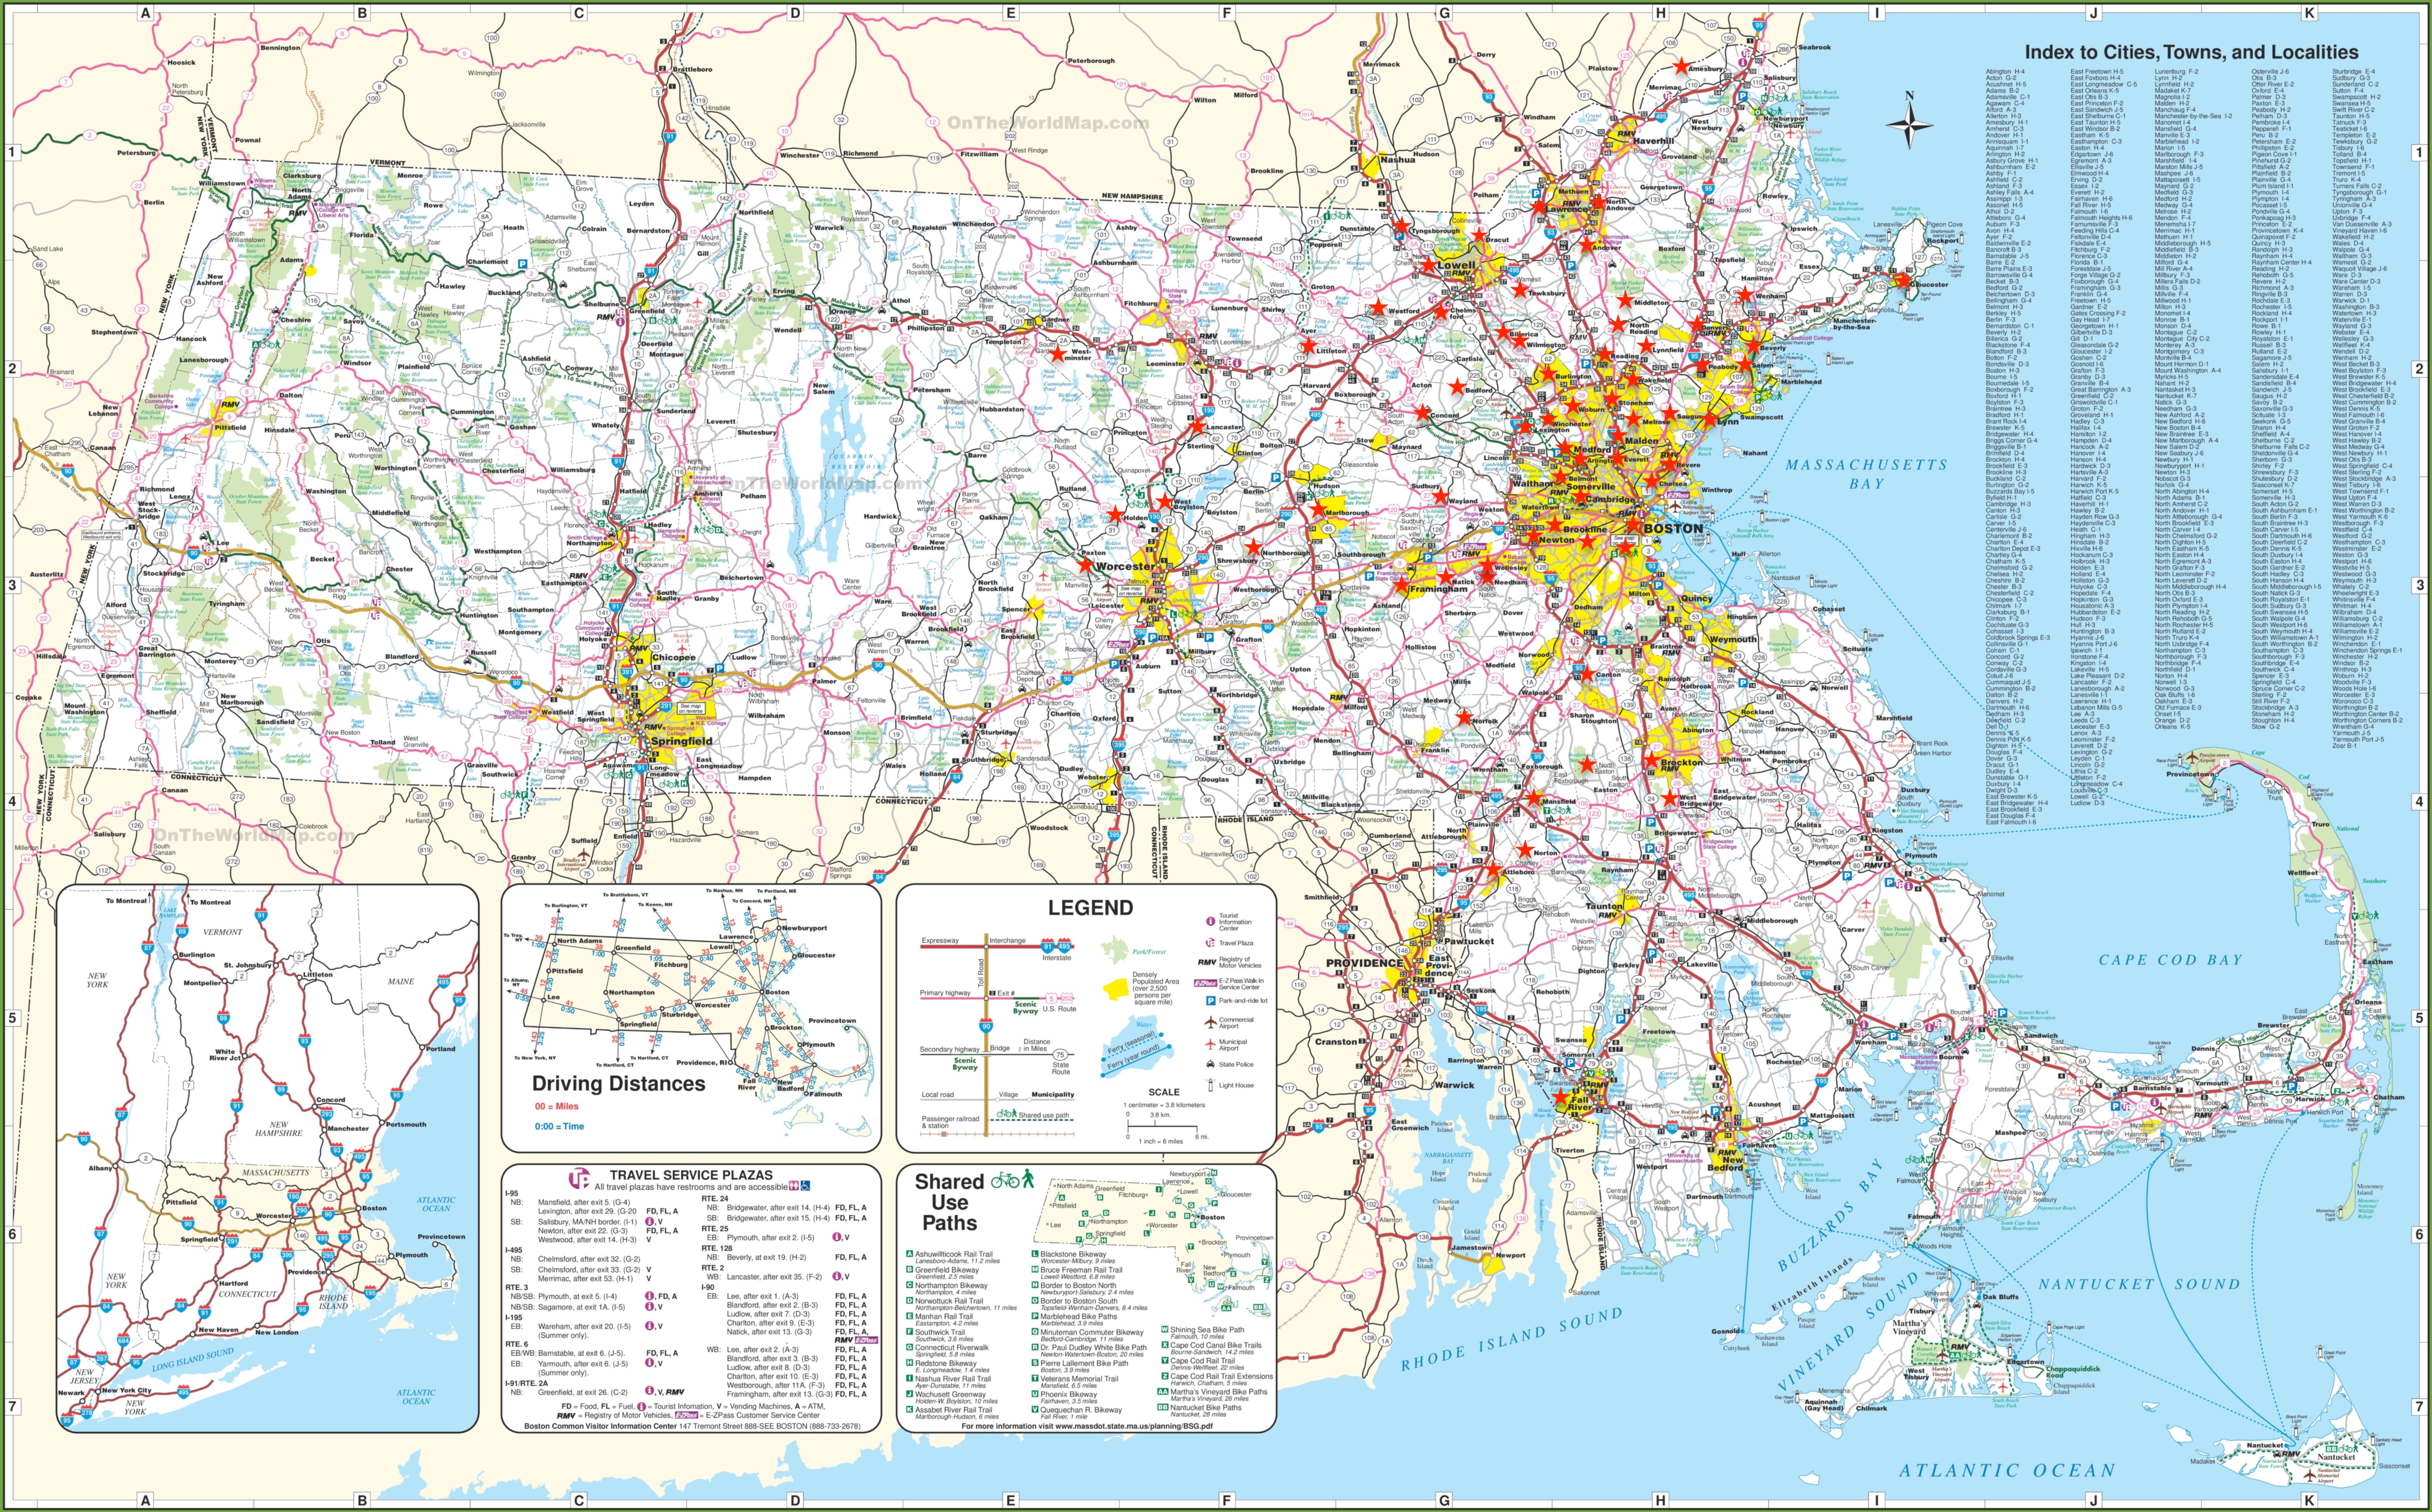 List of: Cities and Towns in Massachusetts